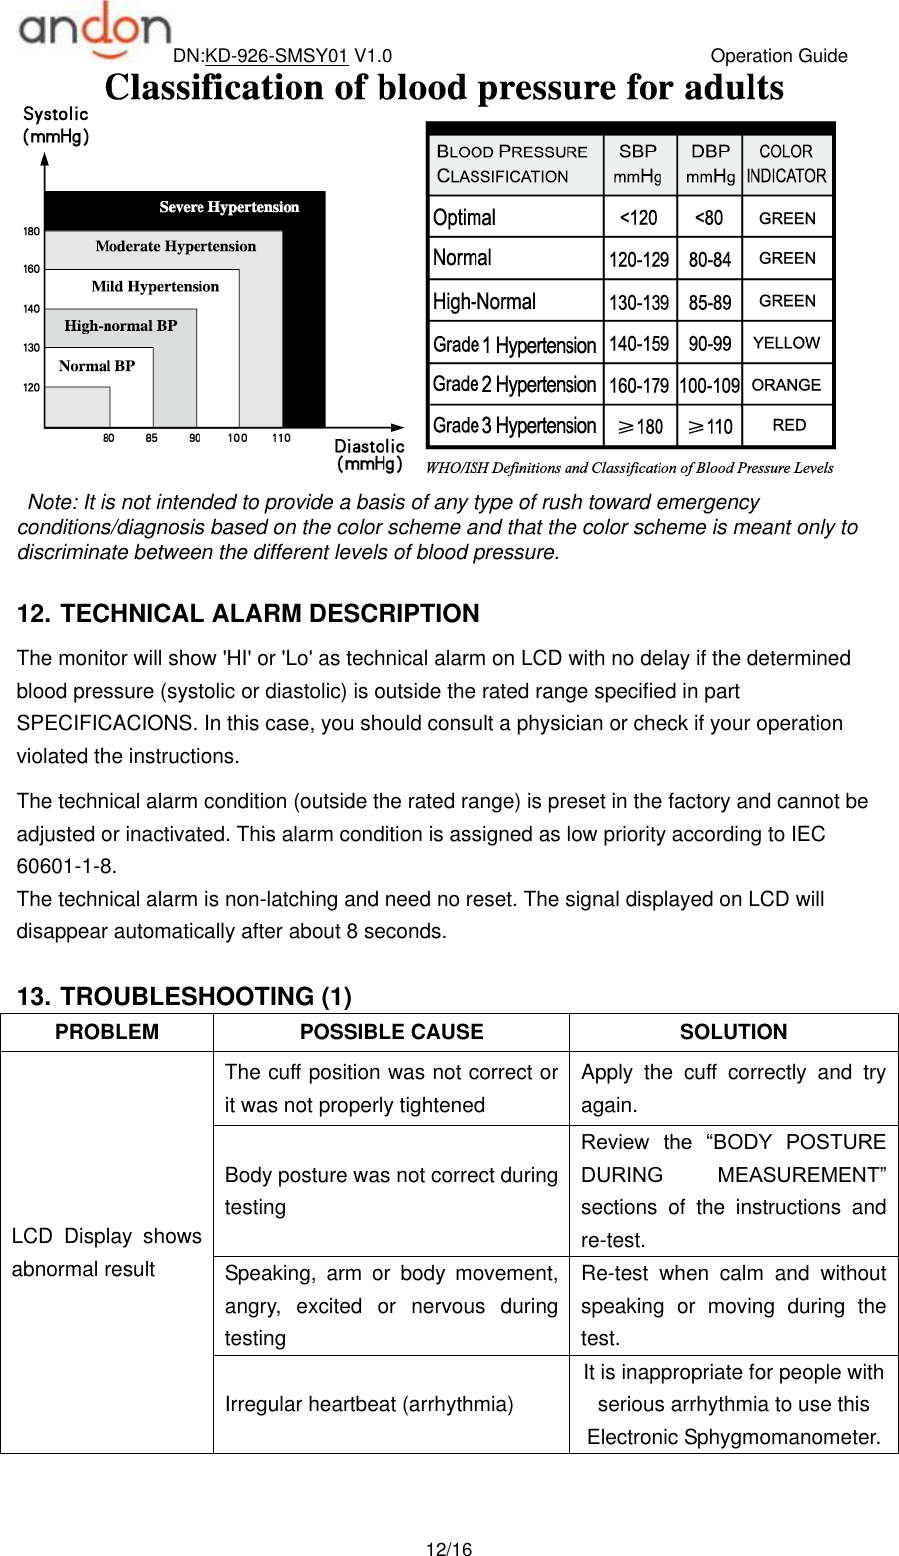 DN:KD-926-SMSY01 V1.0                                  Operation Guide  12/16  Note: It is not intended to provide a basis of any type of rush toward emergency conditions/diagnosis based on the color scheme and that the color scheme is meant only to discriminate between the different levels of blood pressure.    12. TECHNICAL ALARM DESCRIPTION The monitor will show &apos;HI&apos; or &apos;Lo&apos; as technical alarm on LCD with no delay if the determined blood pressure (systolic or diastolic) is outside the rated range specified in part SPECIFICACIONS. In this case, you should consult a physician or check if your operation violated the instructions. The technical alarm condition (outside the rated range) is preset in the factory and cannot be adjusted or inactivated. This alarm condition is assigned as low priority according to IEC 60601-1-8. The technical alarm is non-latching and need no reset. The signal displayed on LCD will disappear automatically after about 8 seconds.  13. TROUBLESHOOTING (1) PROBLEM POSSIBLE CAUSE SOLUTION LCD  Display  shows abnormal result The cuff position was not correct or it was not properly tightened Apply  the  cuff  correctly  and  try again. Body posture was not correct during testing Review  the  “BODY  POSTURE DURING  MEASUREMENT” sections  of  the  instructions  and re-test. Speaking,  arm  or  body  movement, angry,  excited  or  nervous  during testing Re-test  when  calm  and  without speaking  or  moving  during  the test. Irregular heartbeat (arrhythmia) It is inappropriate for people with serious arrhythmia to use this Electronic Sphygmomanometer. 